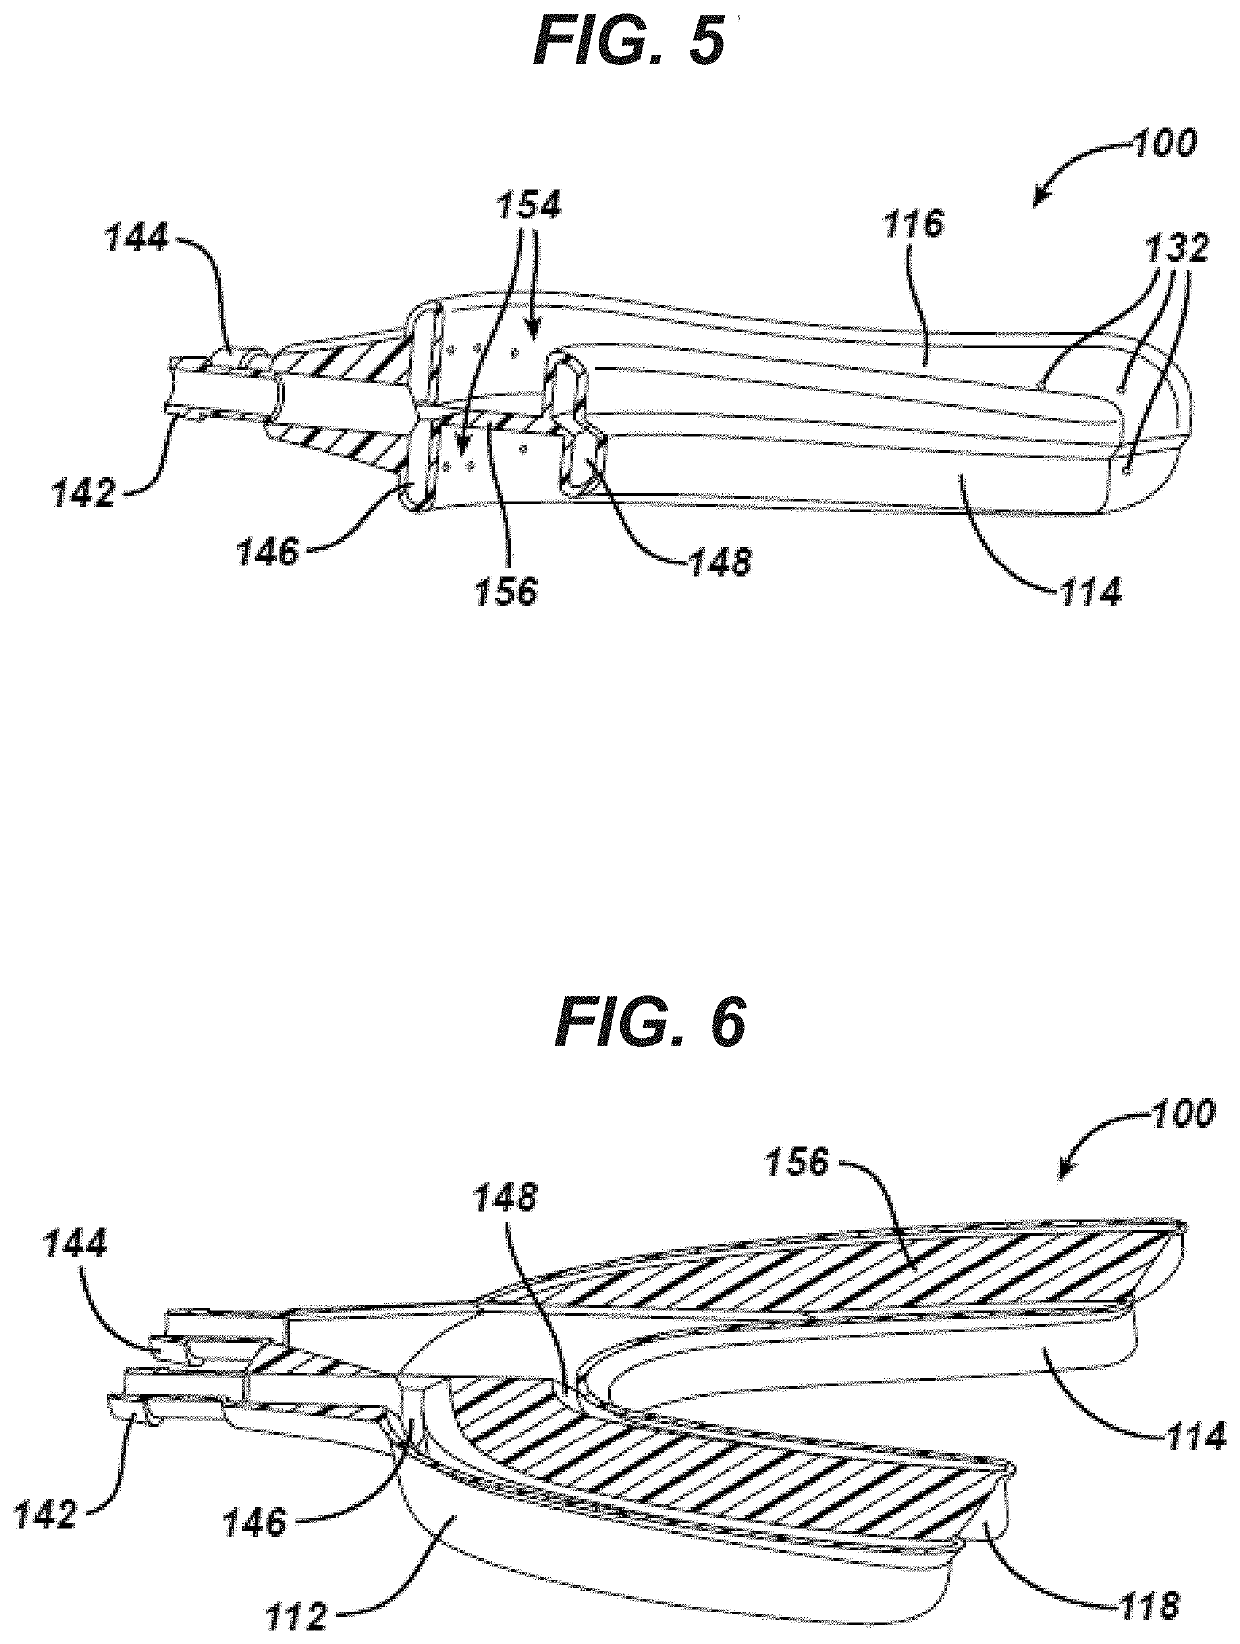 Devices and Methods for Collecting Saliva Samples from the Oral Cavity